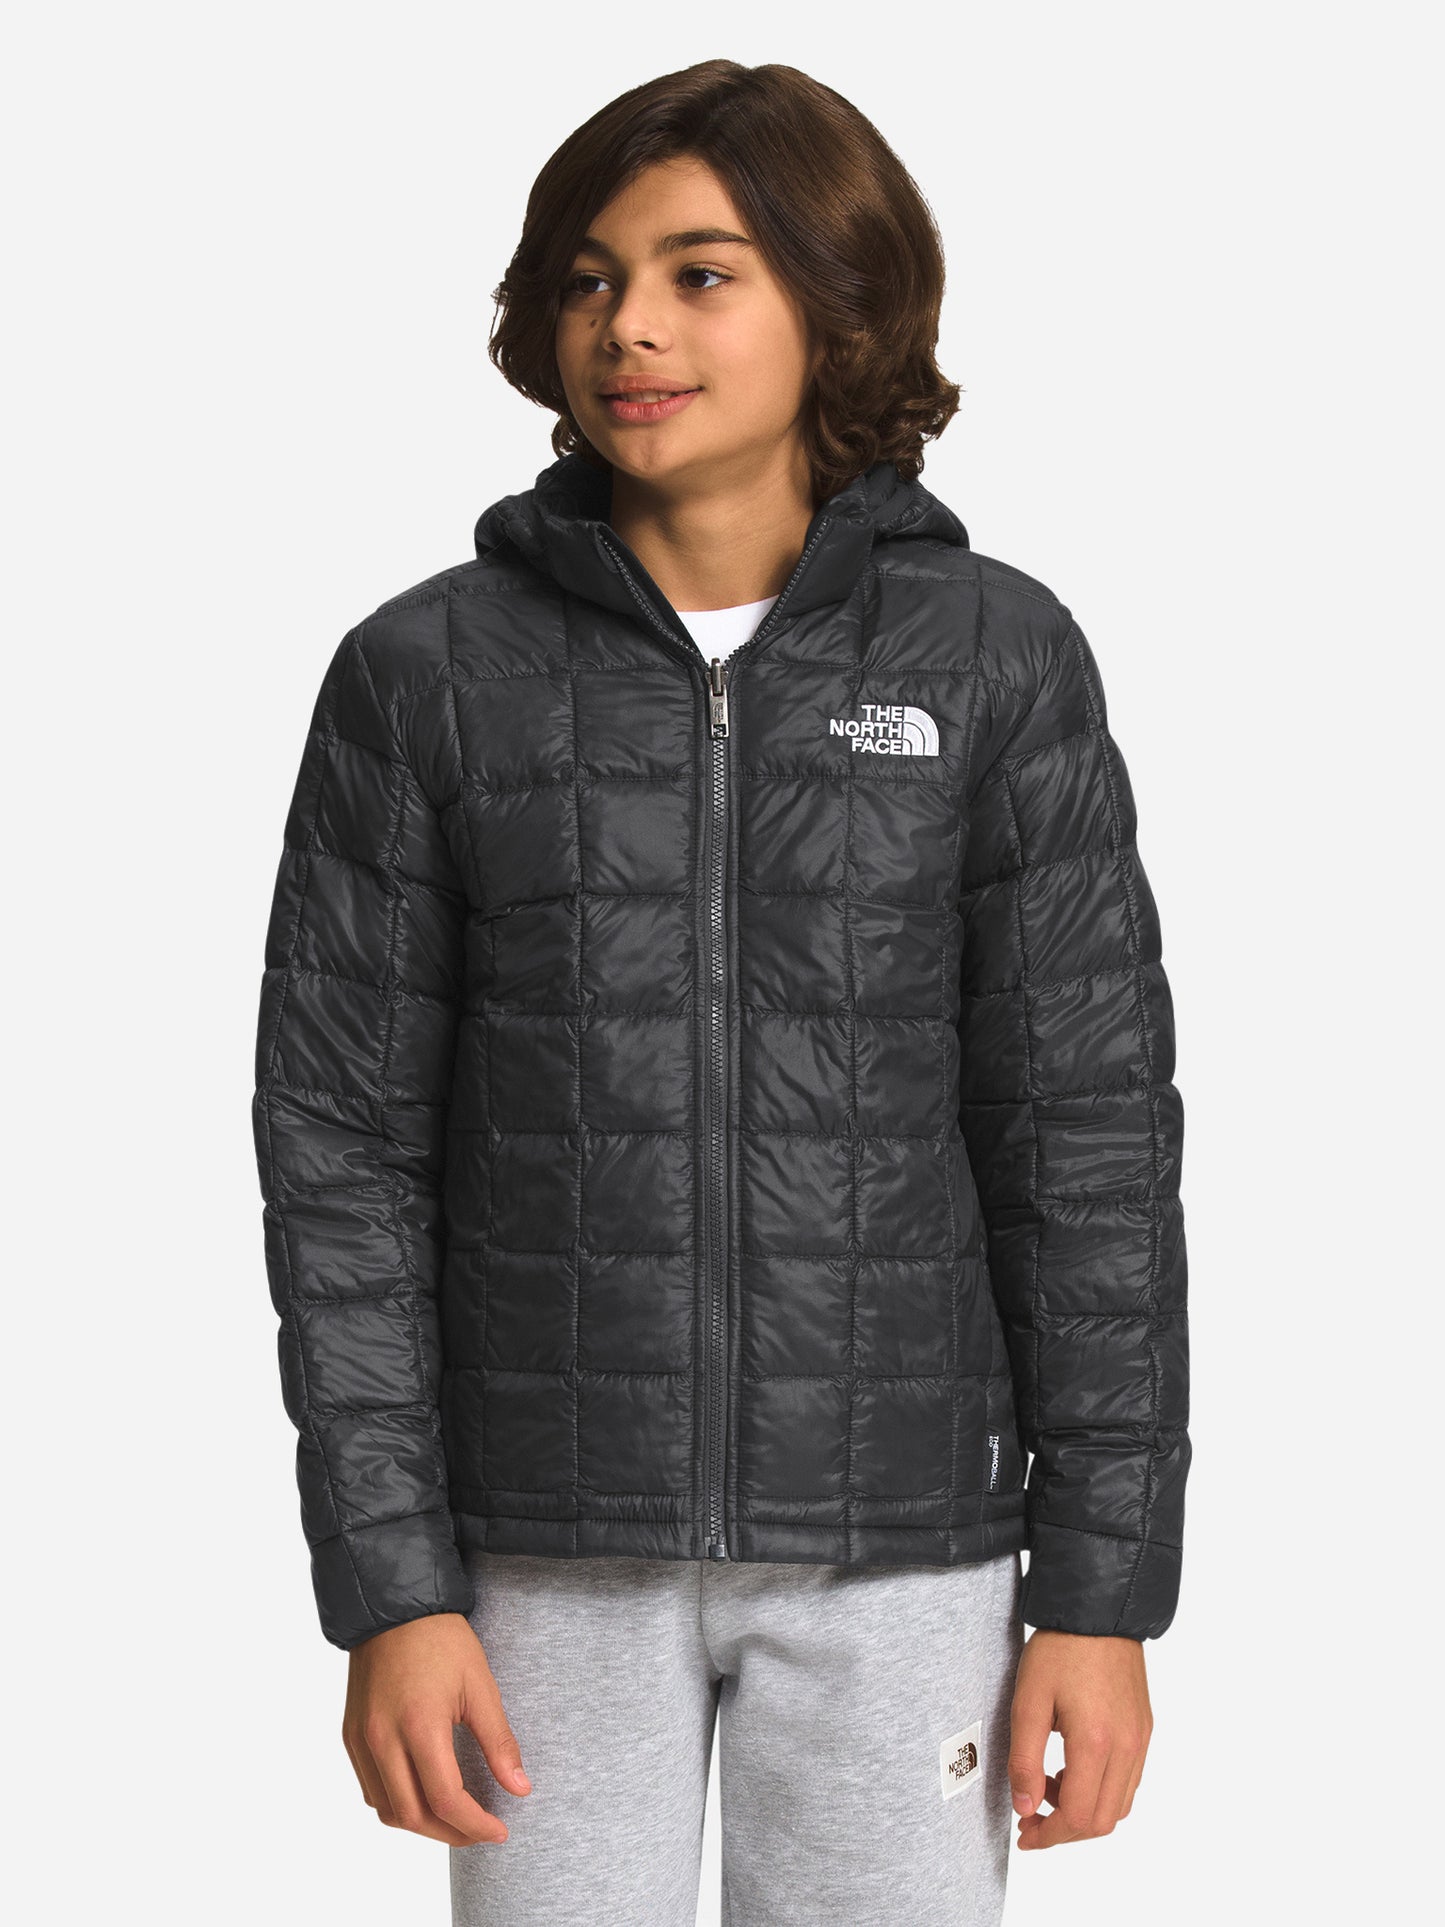 The North Face Boys’ ThermoBall Hooded Jacket